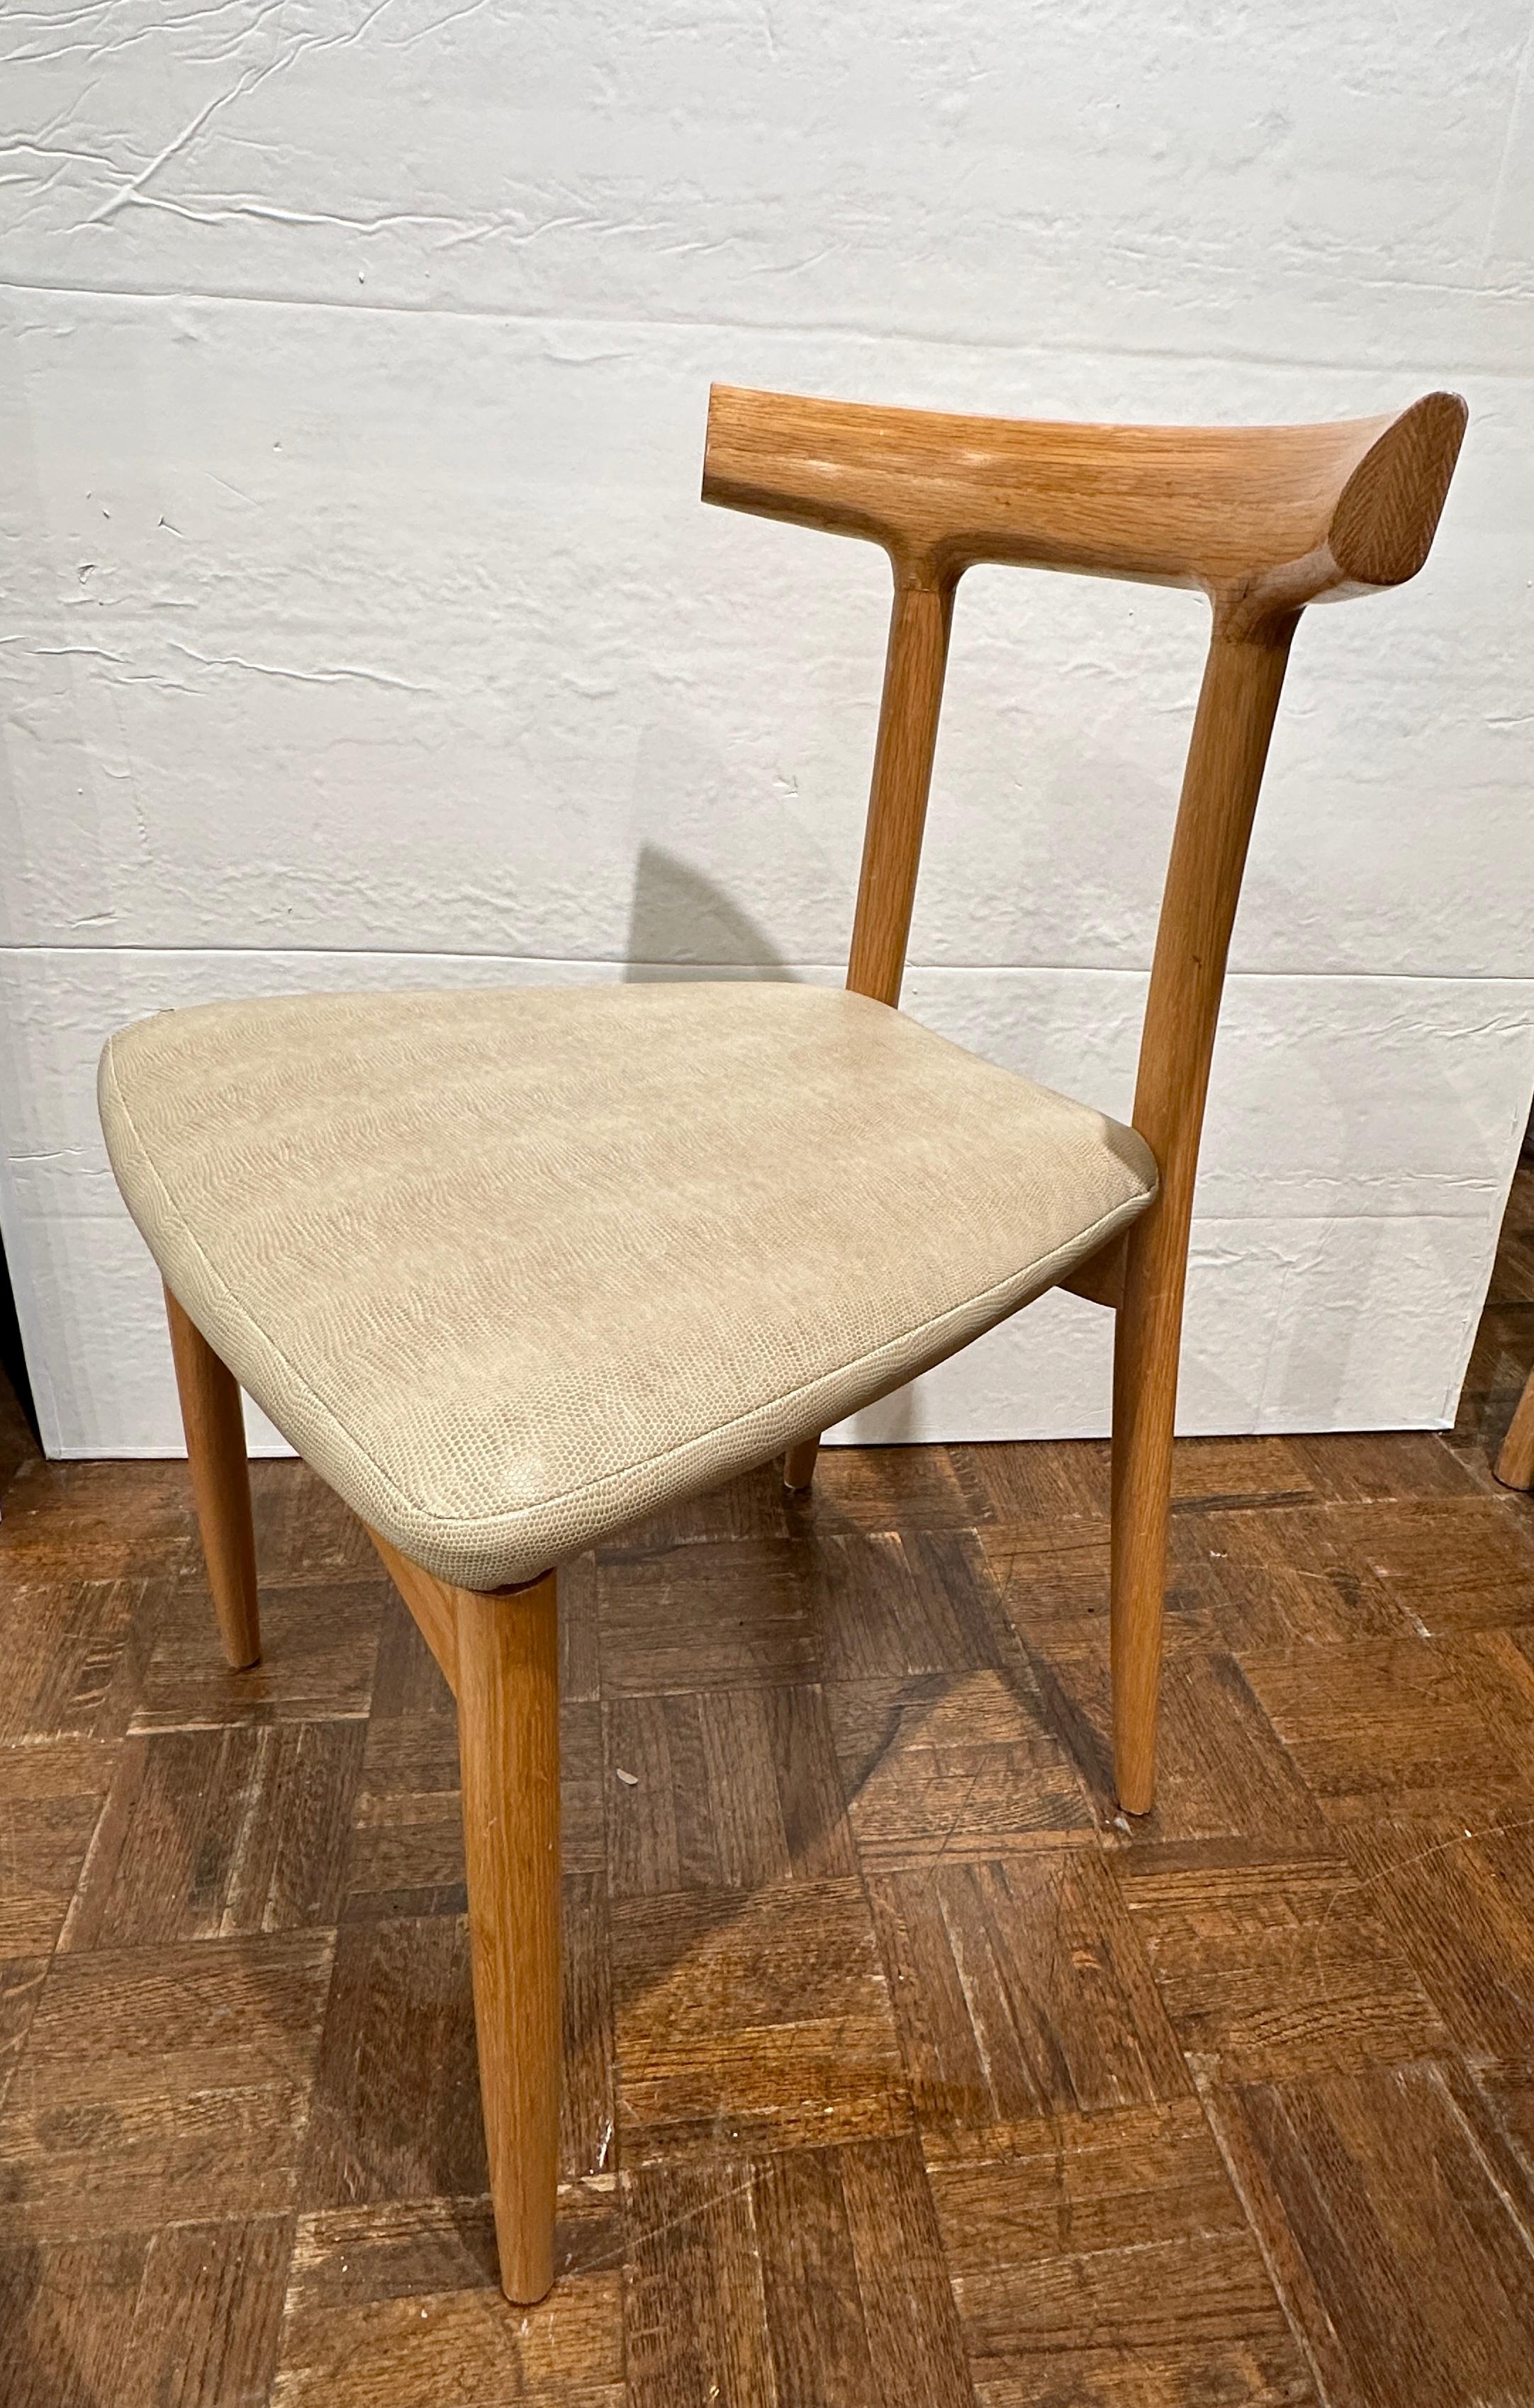 Set of 6 dining chairs yoke style by Maria Yee.  Wonderfully comfortable Mid Century Modern look with Asian flair.  Made of solid hard wood, clear bleached oak, 
Yoke back carved for comfort.  Seats are covered in faux shagreen leather.
( faux